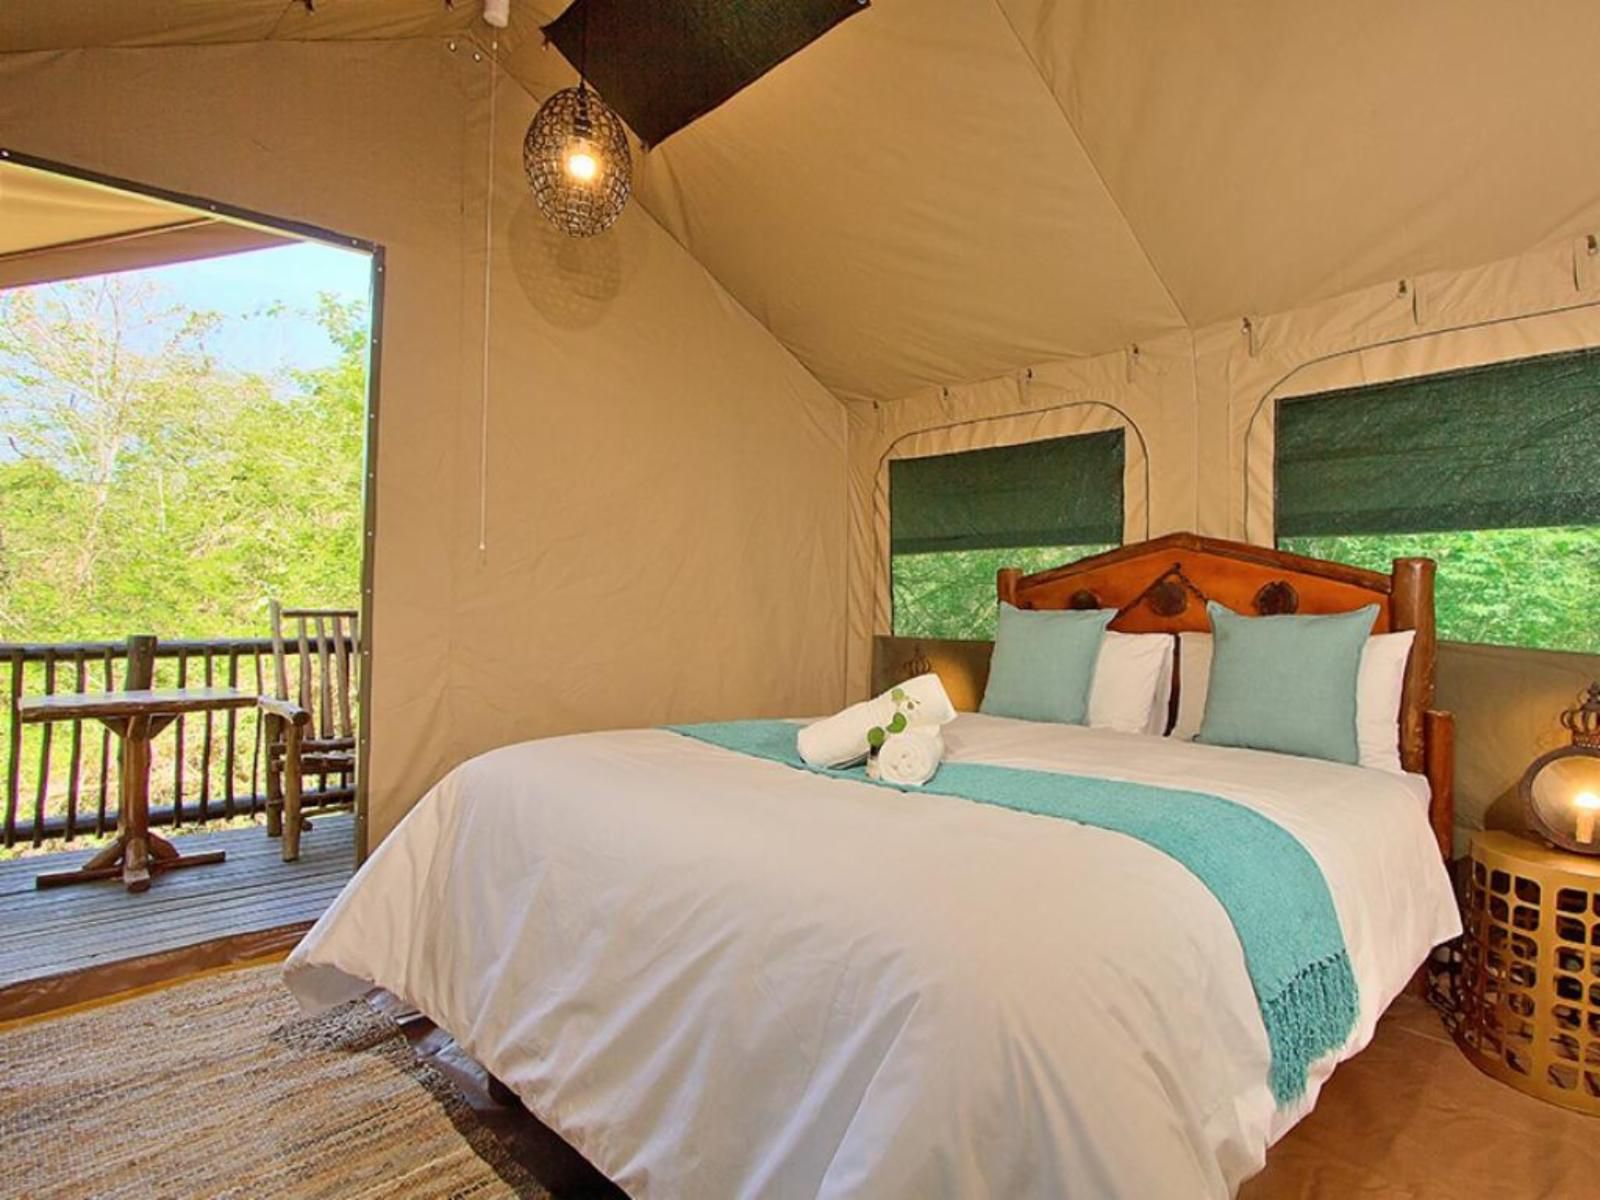 Kruger Adventure Lodge Hazyview Mpumalanga South Africa Tent, Architecture, Bedroom